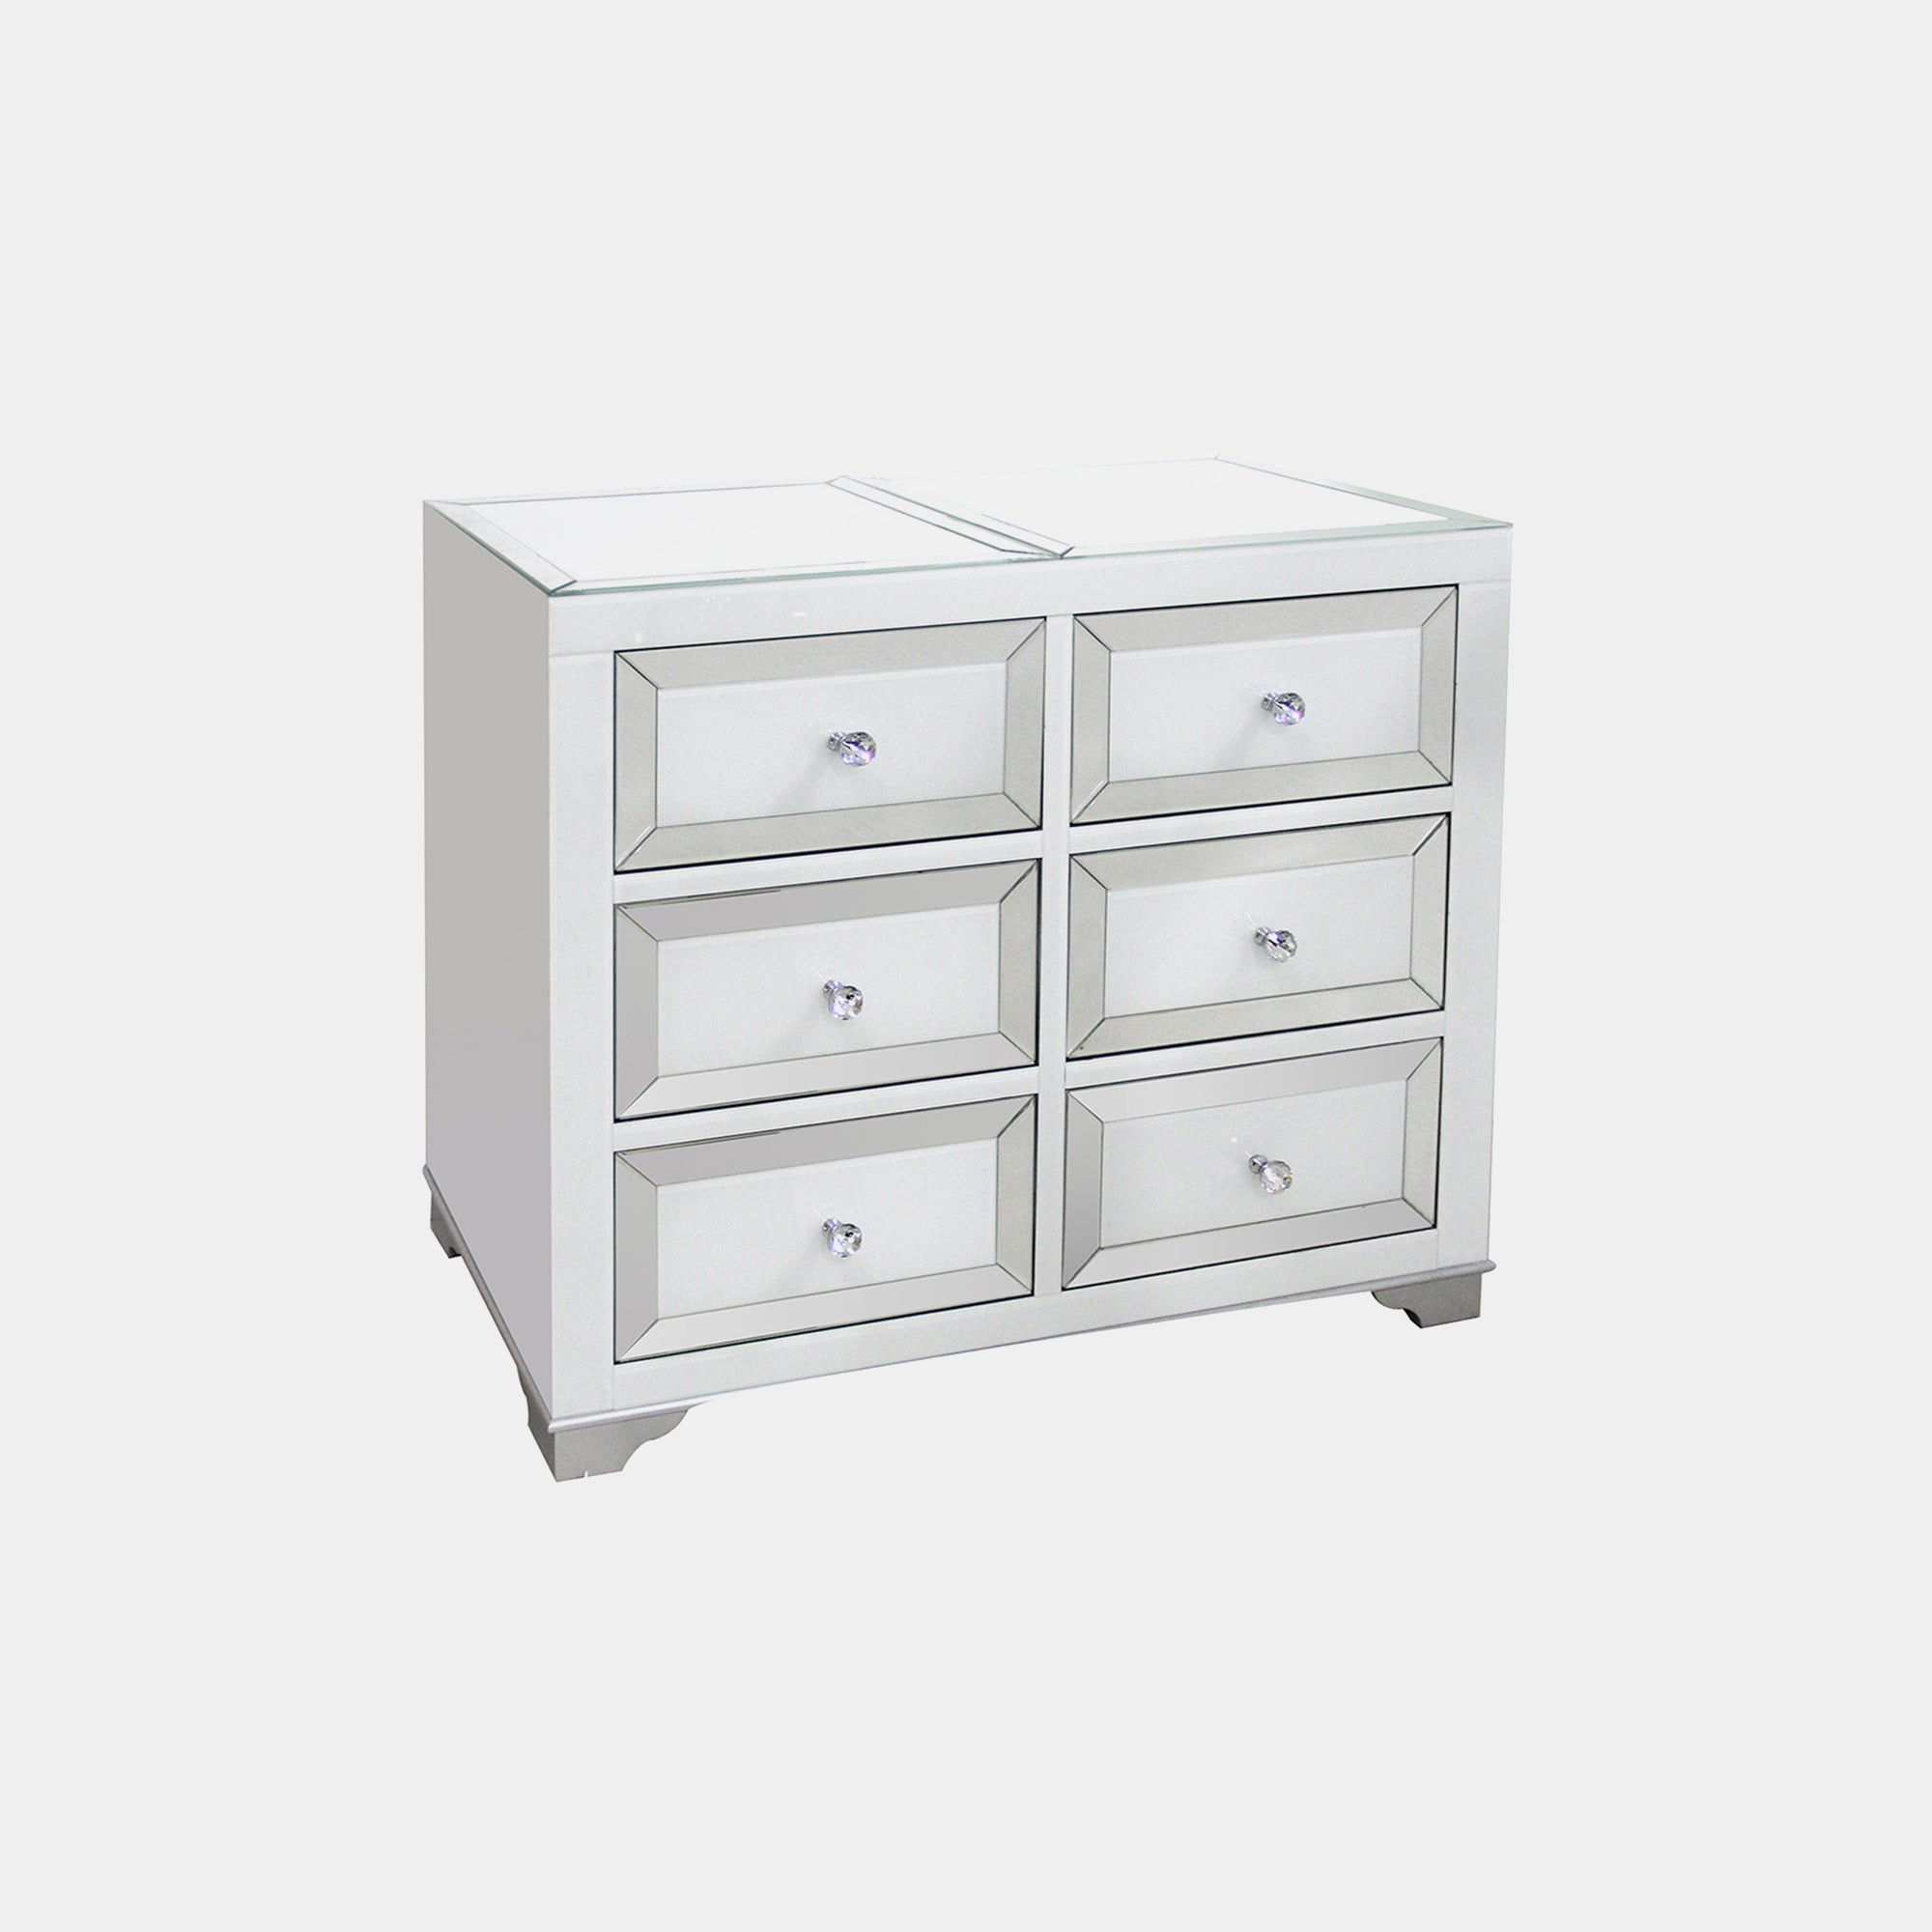 6 Drawer Wide Chest Mirrored Silver & White